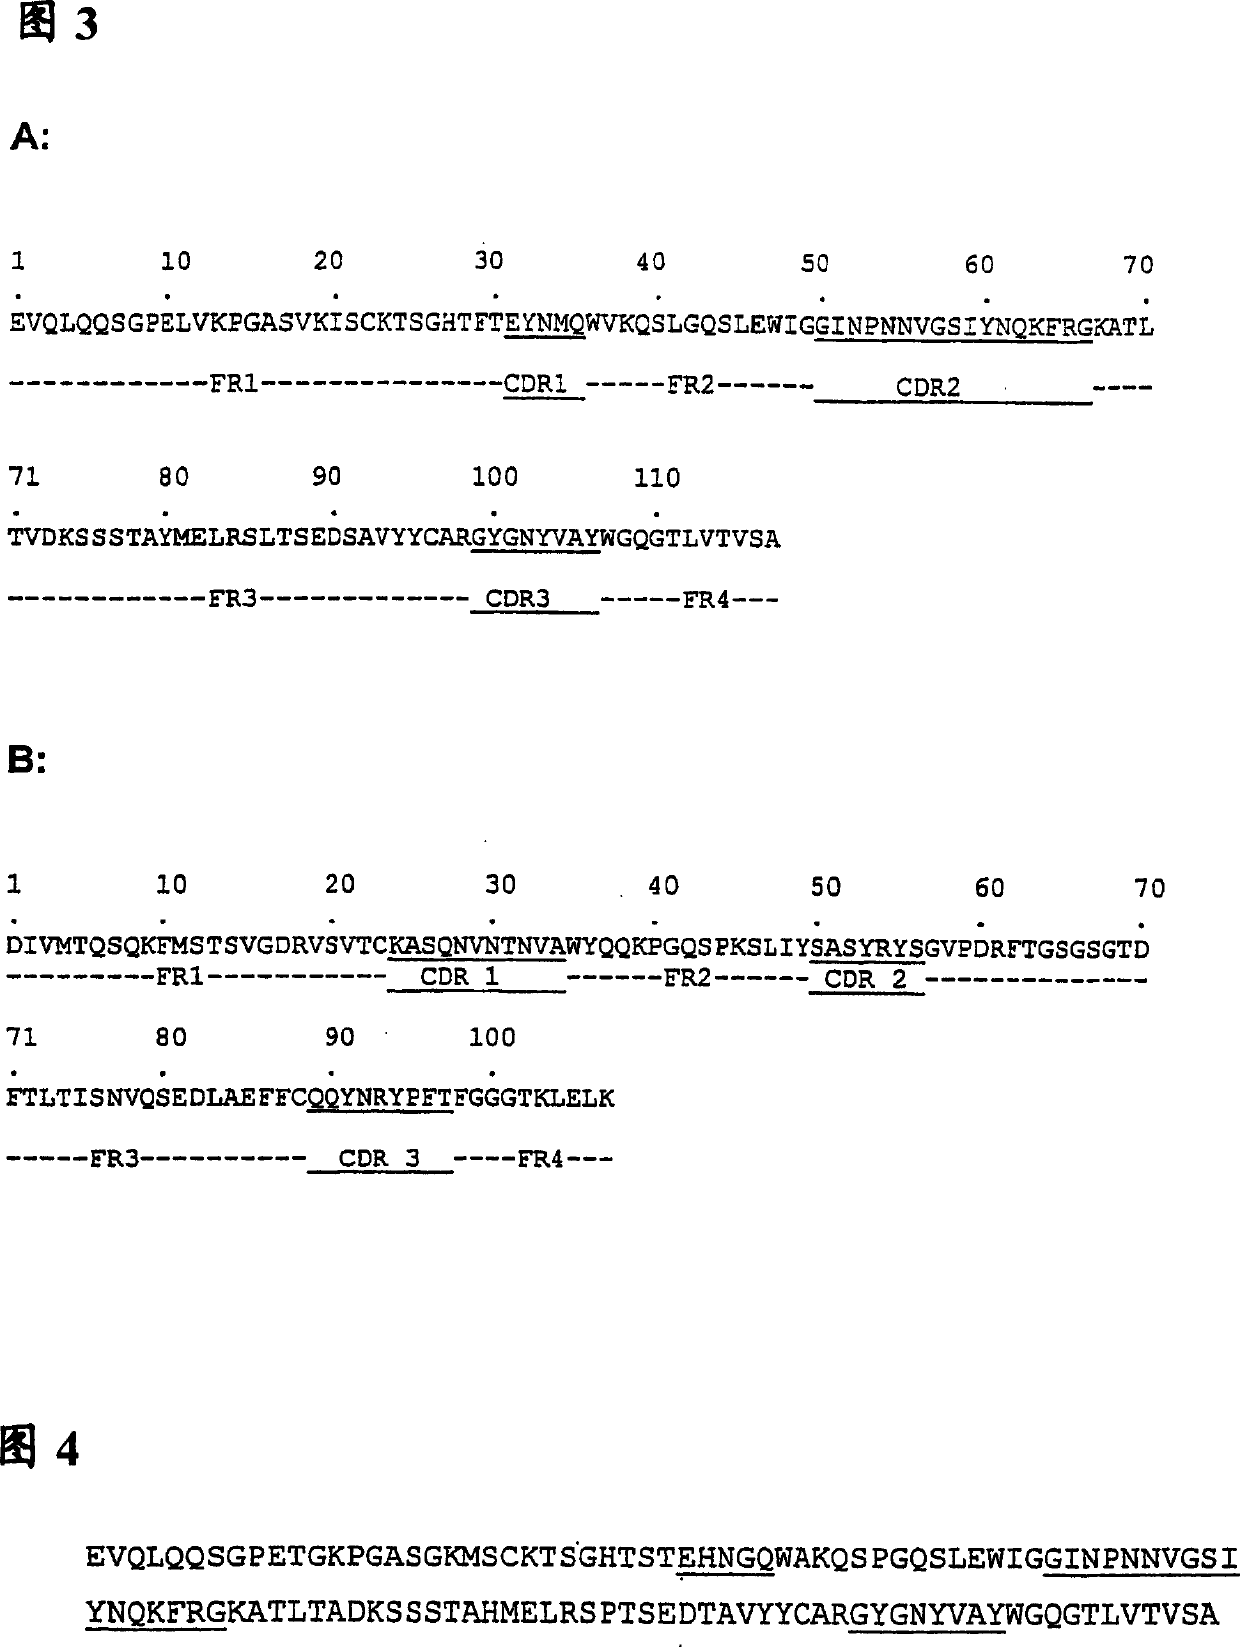 Anti-idiotype anti-CEA antibody molecules and its use as cancer vaccine